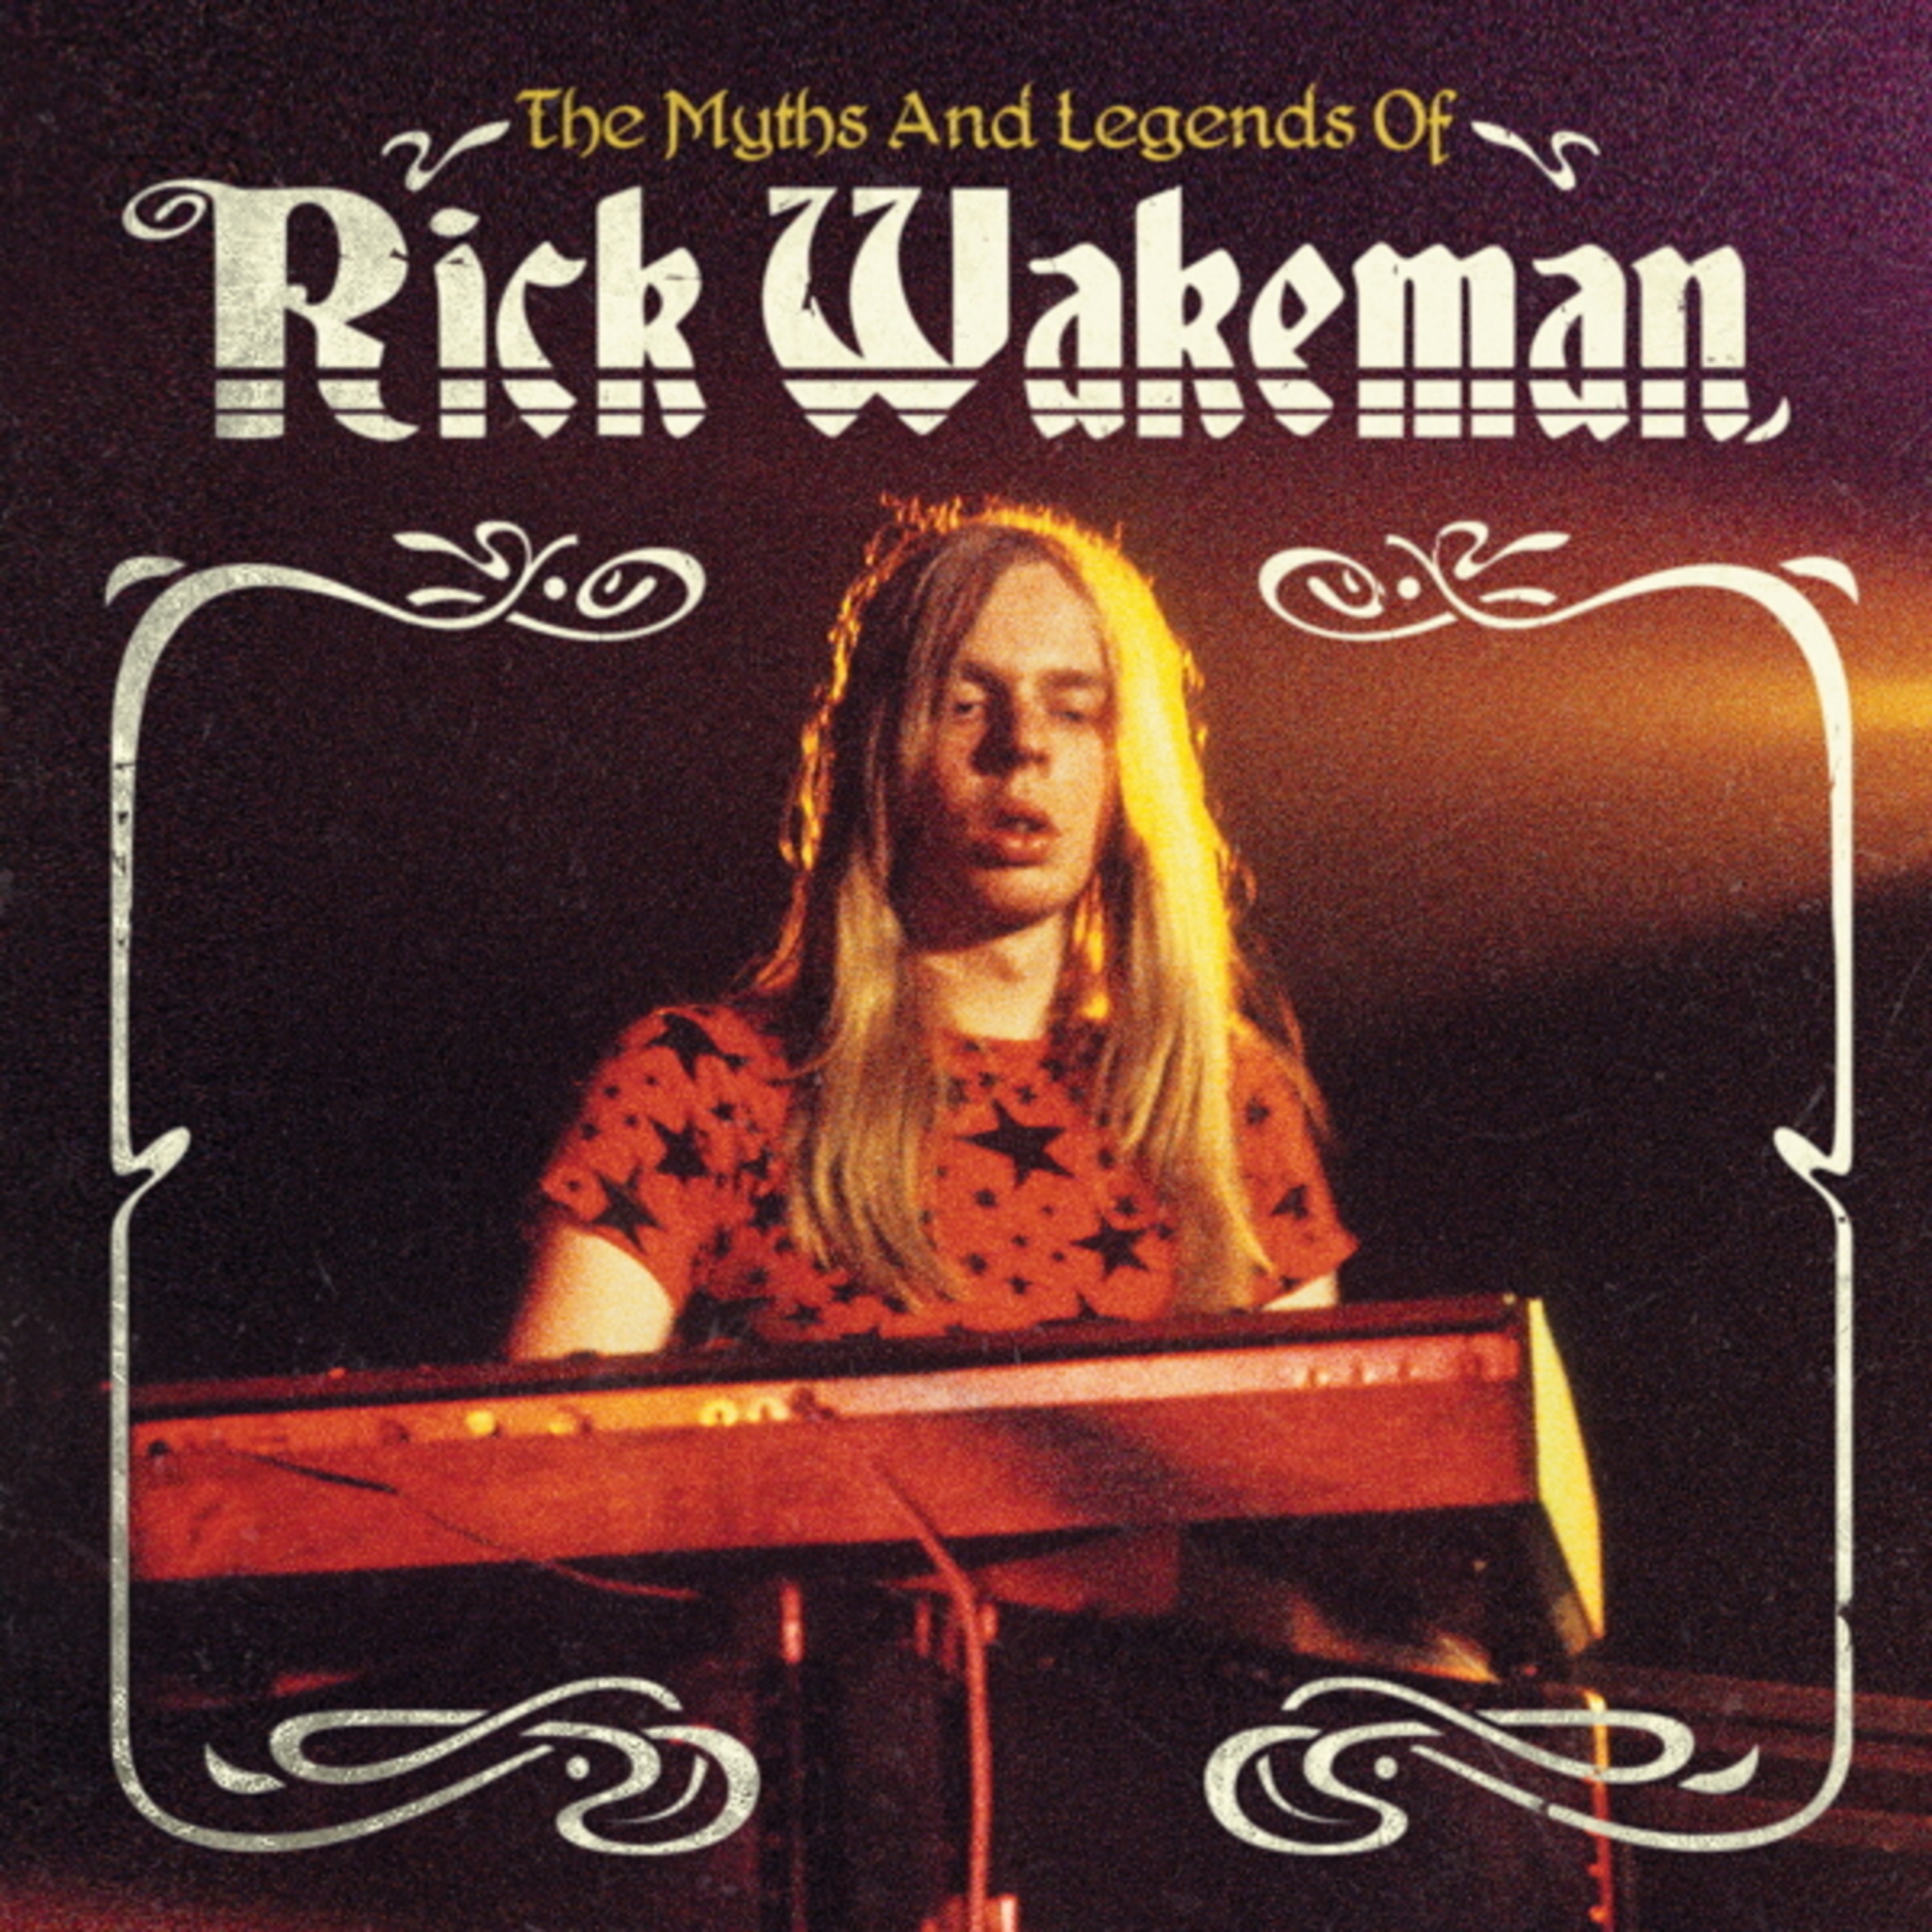 “The Myths And Legends Of Rick Wakeman” 4CD Box Set Featuring Vintage Concert Recordings!